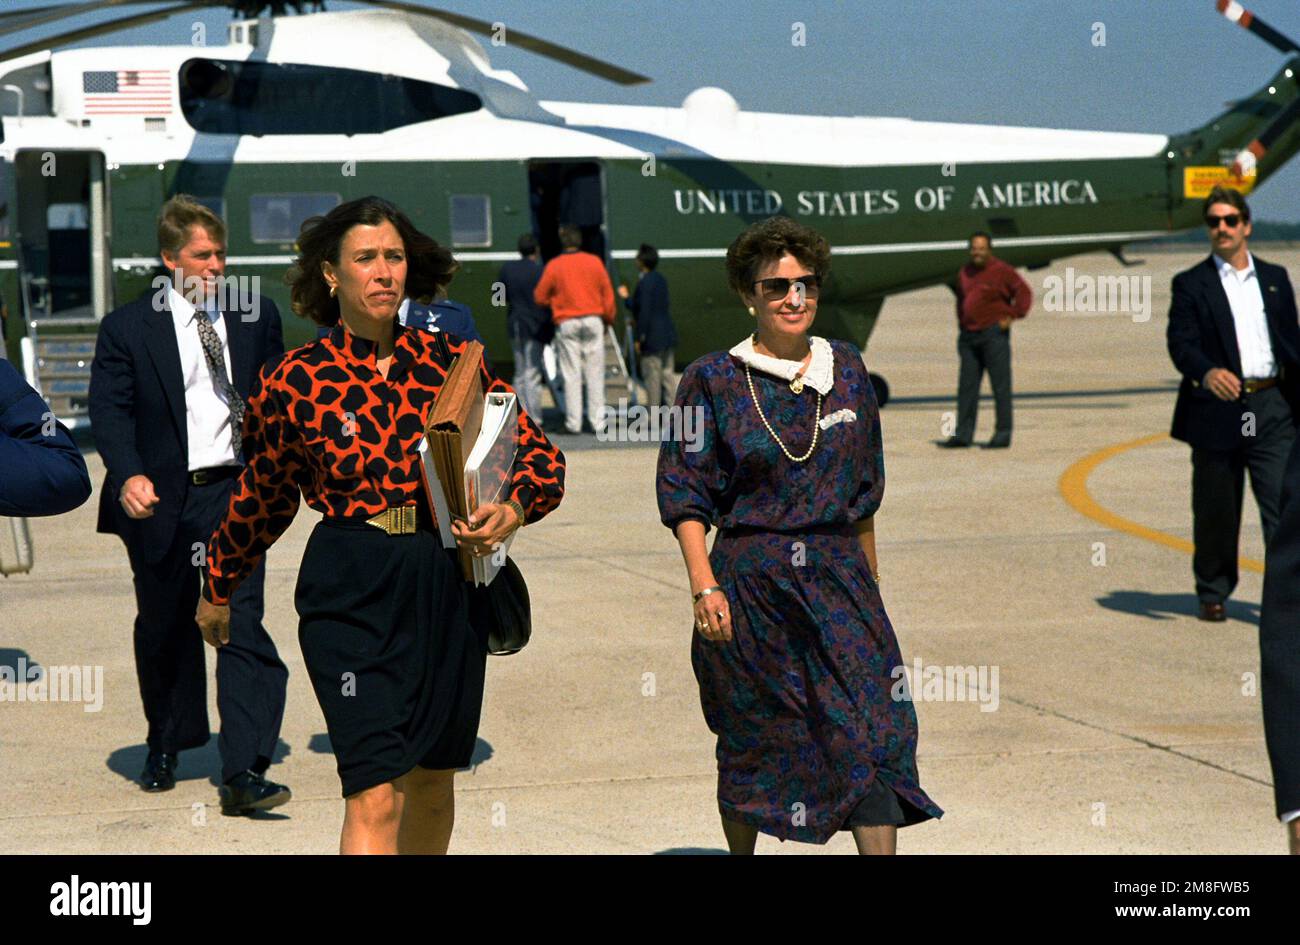 Mrs. Bobbie Mitchell, wife of BGEN Bobbie L. Mitchell, commander, 89th Airlift Wing, Military Airlift Command, escorts Marilyn Quayle across the flight line as Vice President Dan Quayle, background, walks with BGEN Mitchell. The Quayles have just disembarked a VH-3D Sea King helicopter of Marine Helicopter Squadron 1 (HMX-1) and will be boarding Air Force 2 as they depart from Andrews AFB. Base: Andrews Air Force Base State: Maryland(MD) Country: United States Of America(USA) Stock Photo